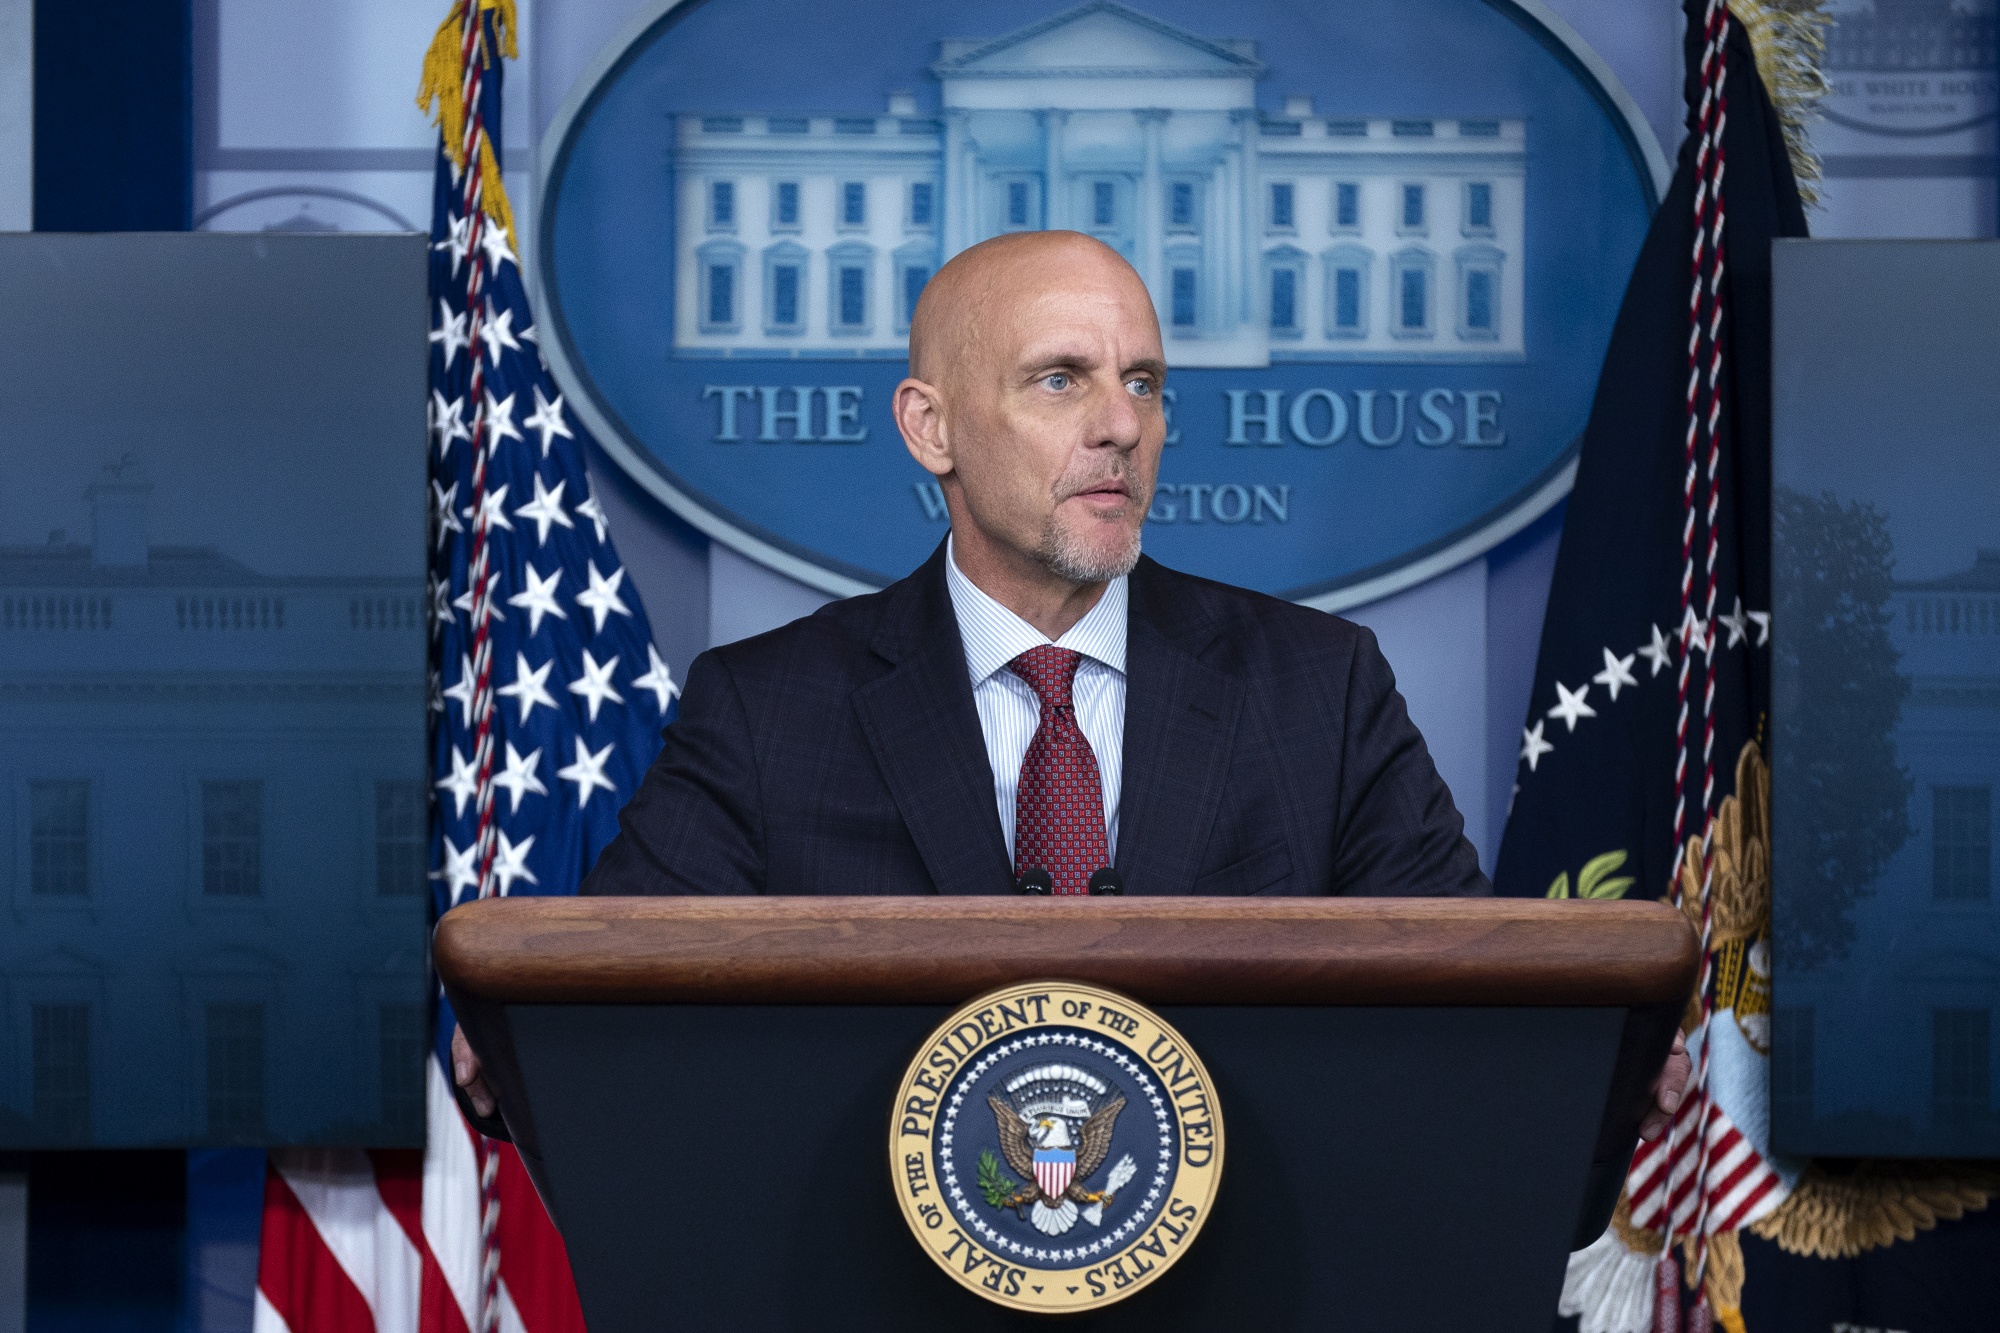 Stephen Hahnspeaks during a news conference in the James S. Brady Press Briefing Room at the White House in Washington D.C., U.S., on Aug. 23.